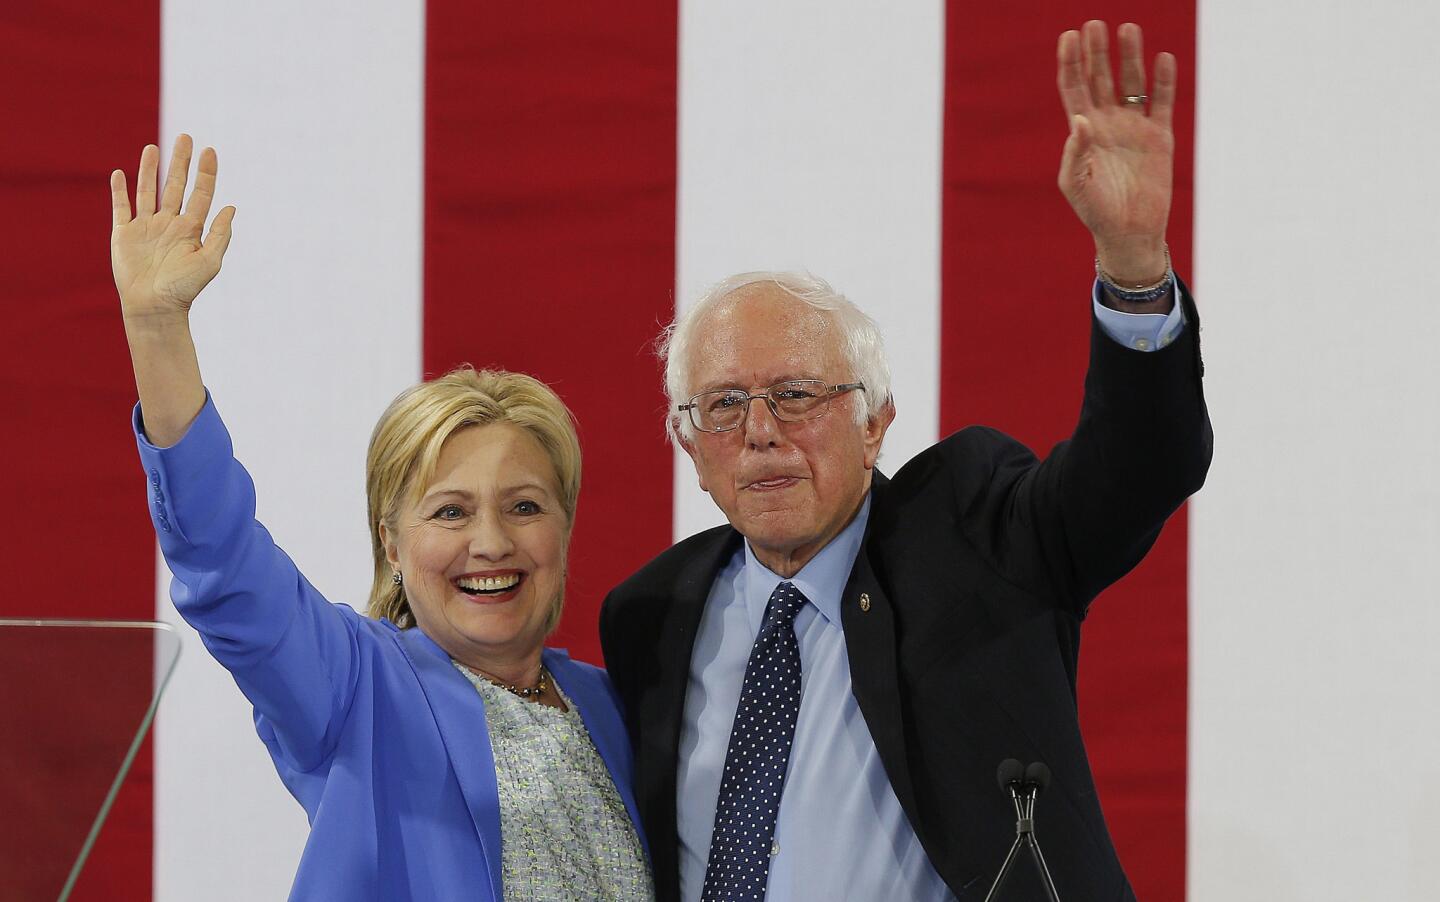 Democratic Presidential candidate Hillary Clinton with former Democratic Presidential candidate Bernie Sanders as they appear together at an event in Portsmouth, New Hampshire.